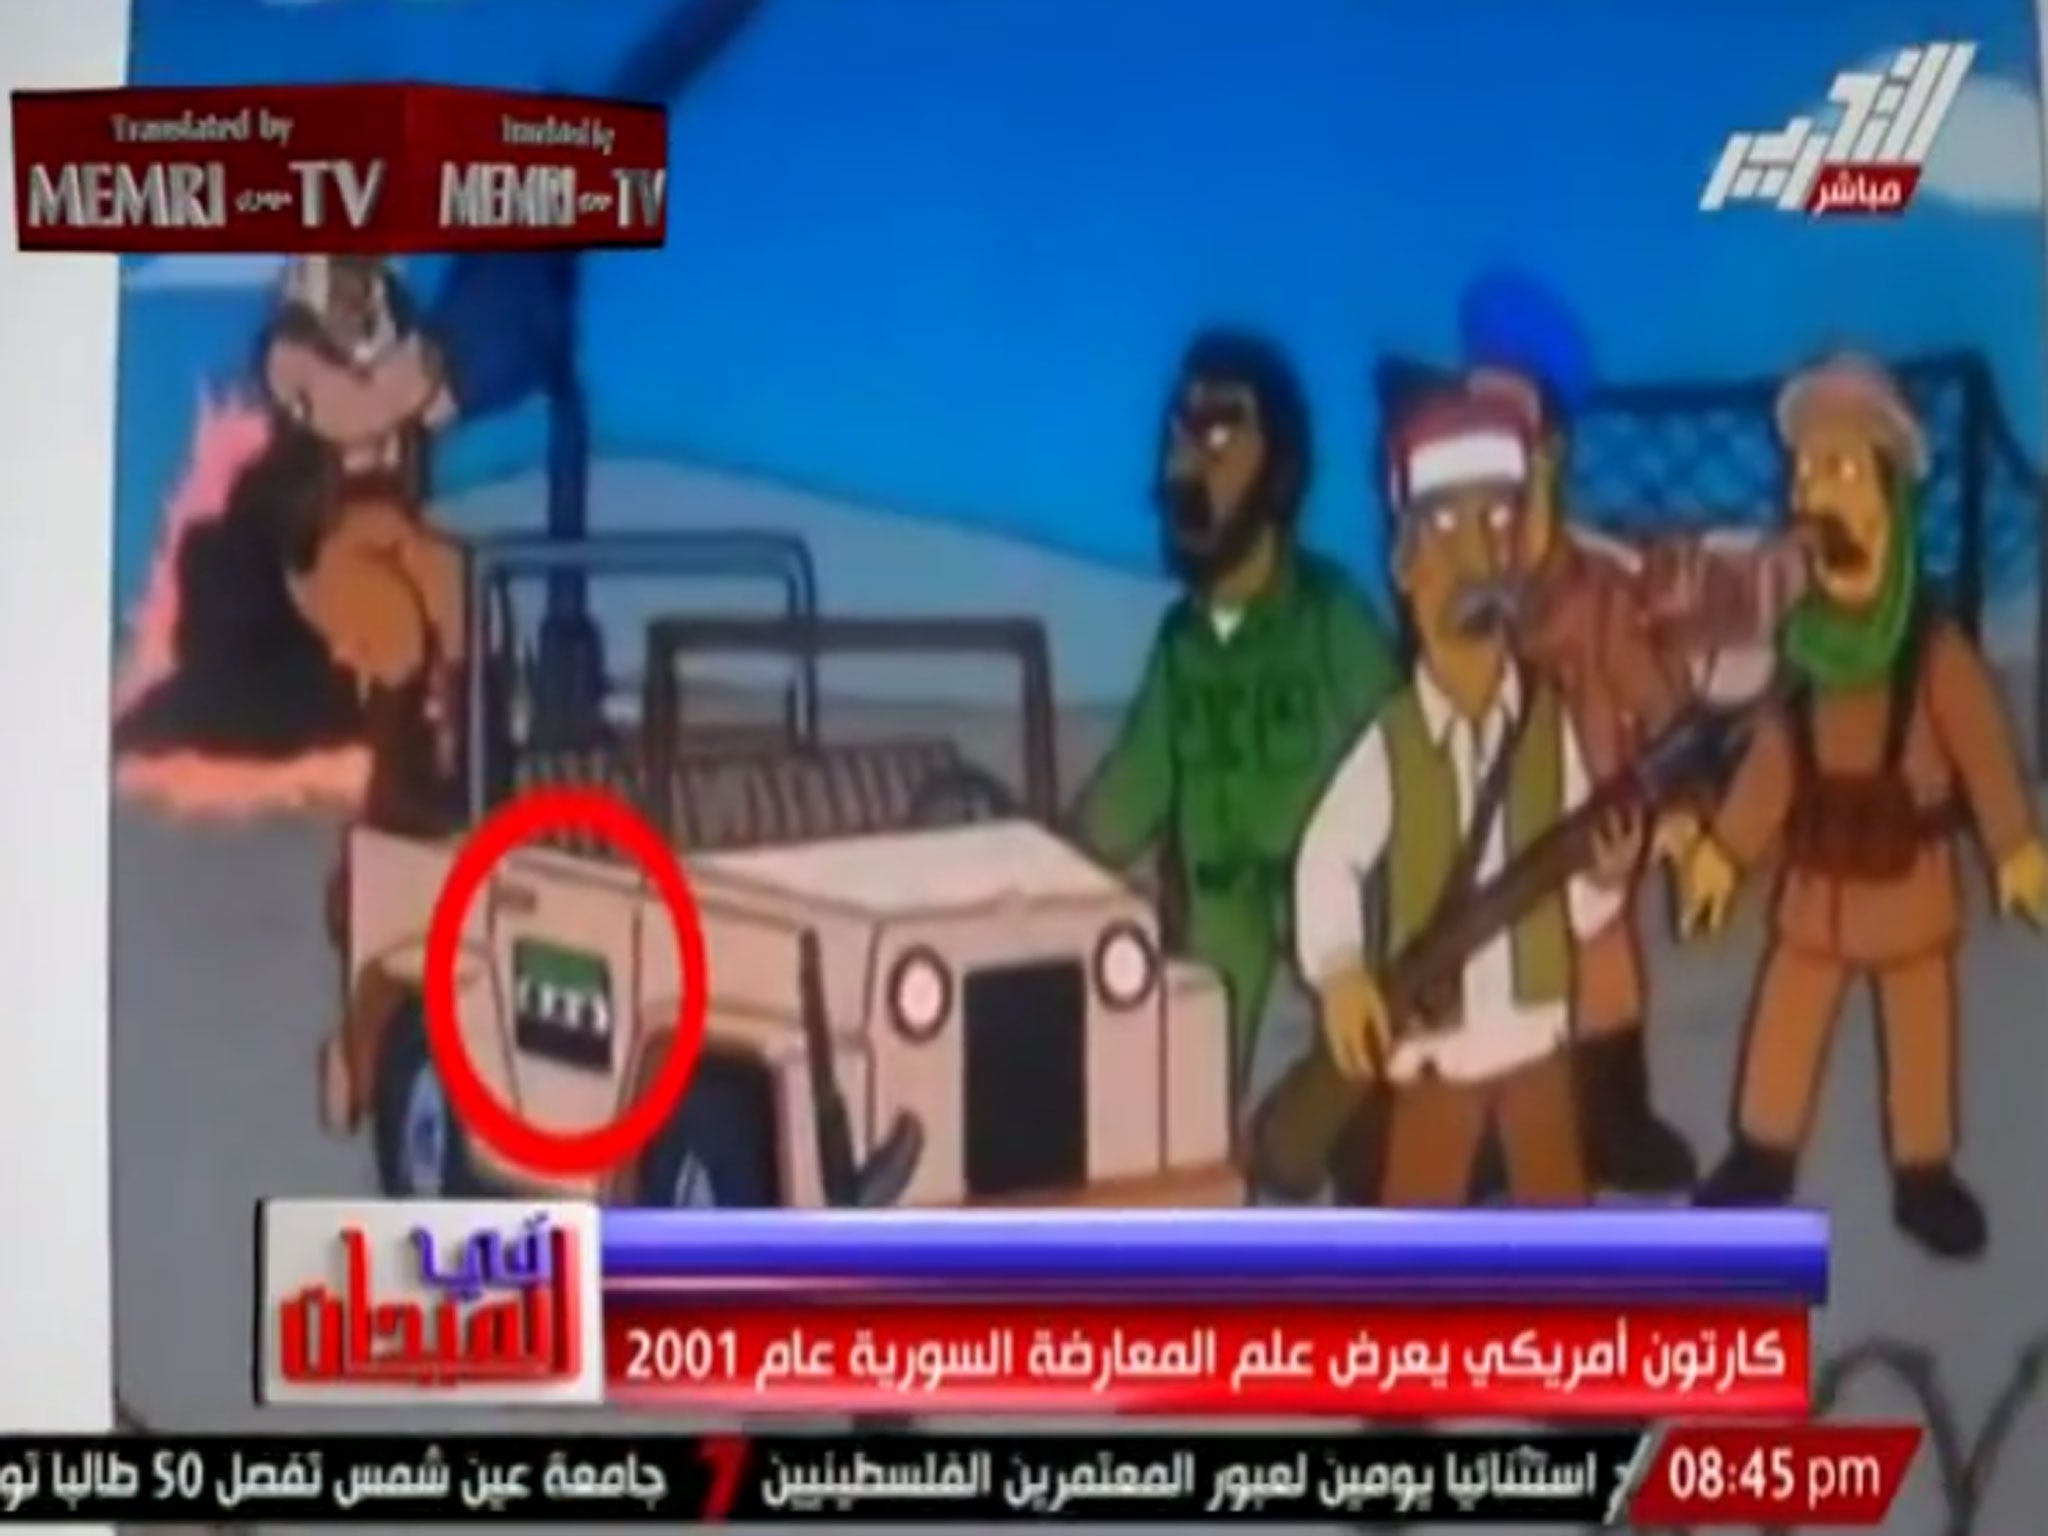 Egyptian TV claimed the US show displayed a flag used by Syrian opposition before the 'opposition even existed' as part of a grand conspiracy